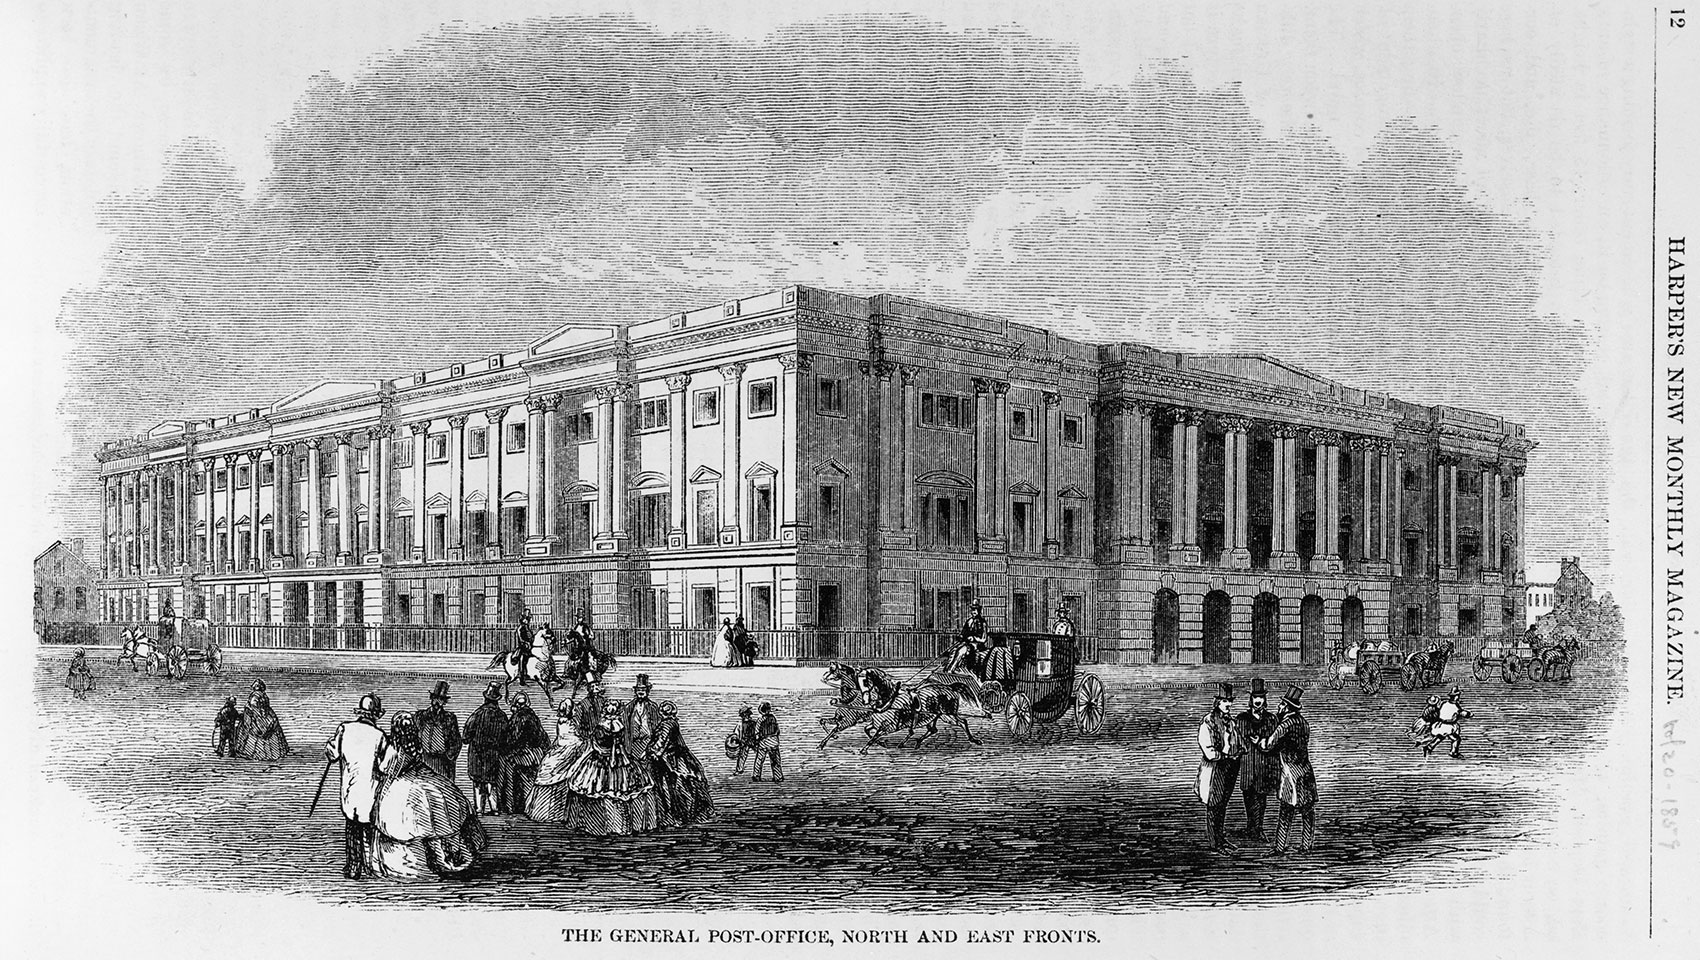 1859 engraving of Washington DC's General Post Office from Harper's New Monthly Magazine